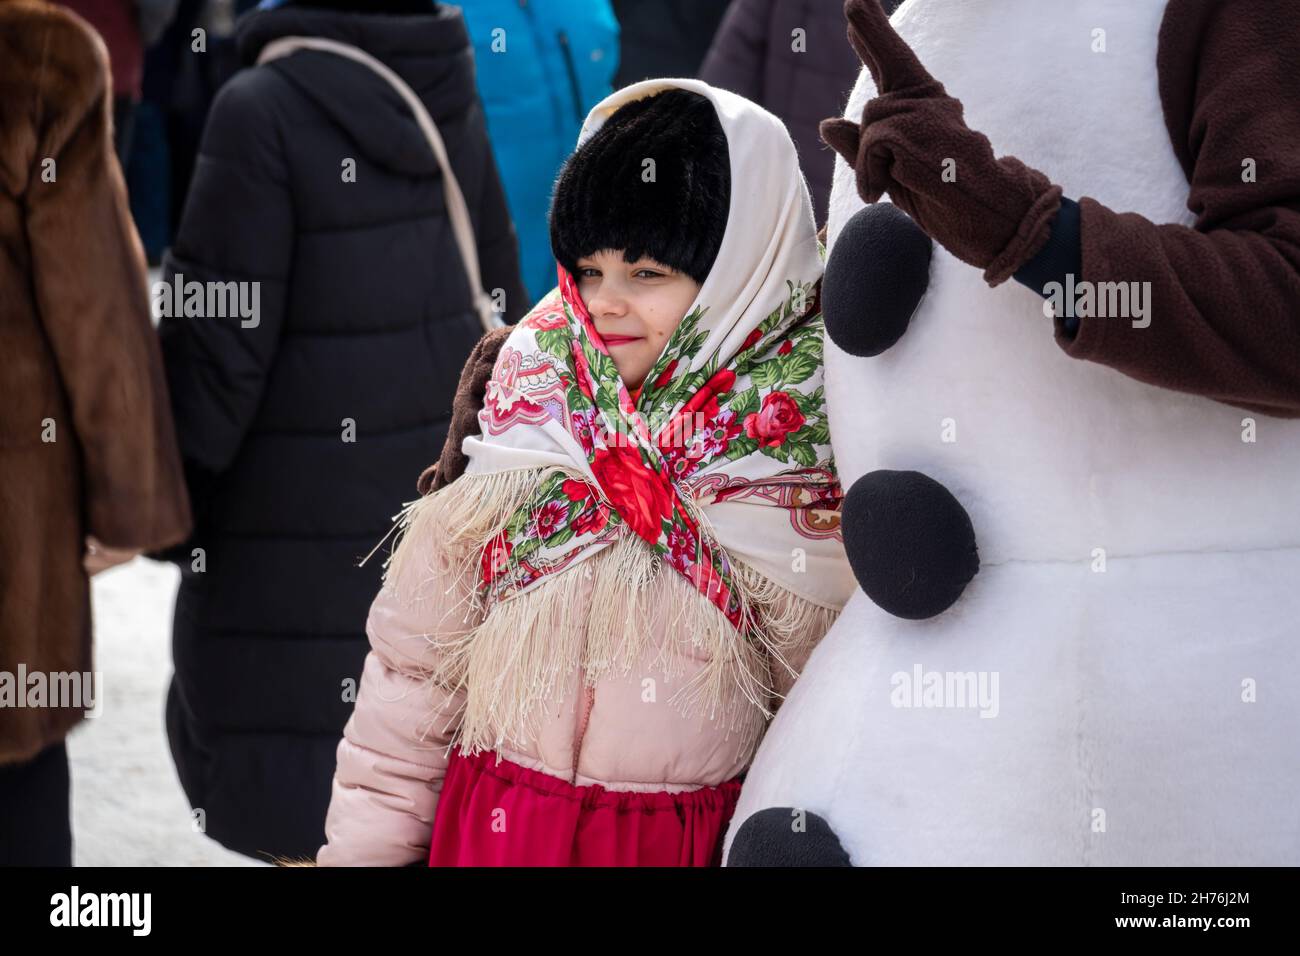 A girl in a Russian folk headscarf stands near a snowman actor at the Farewell to Winter festival in a city park. Stock Photo